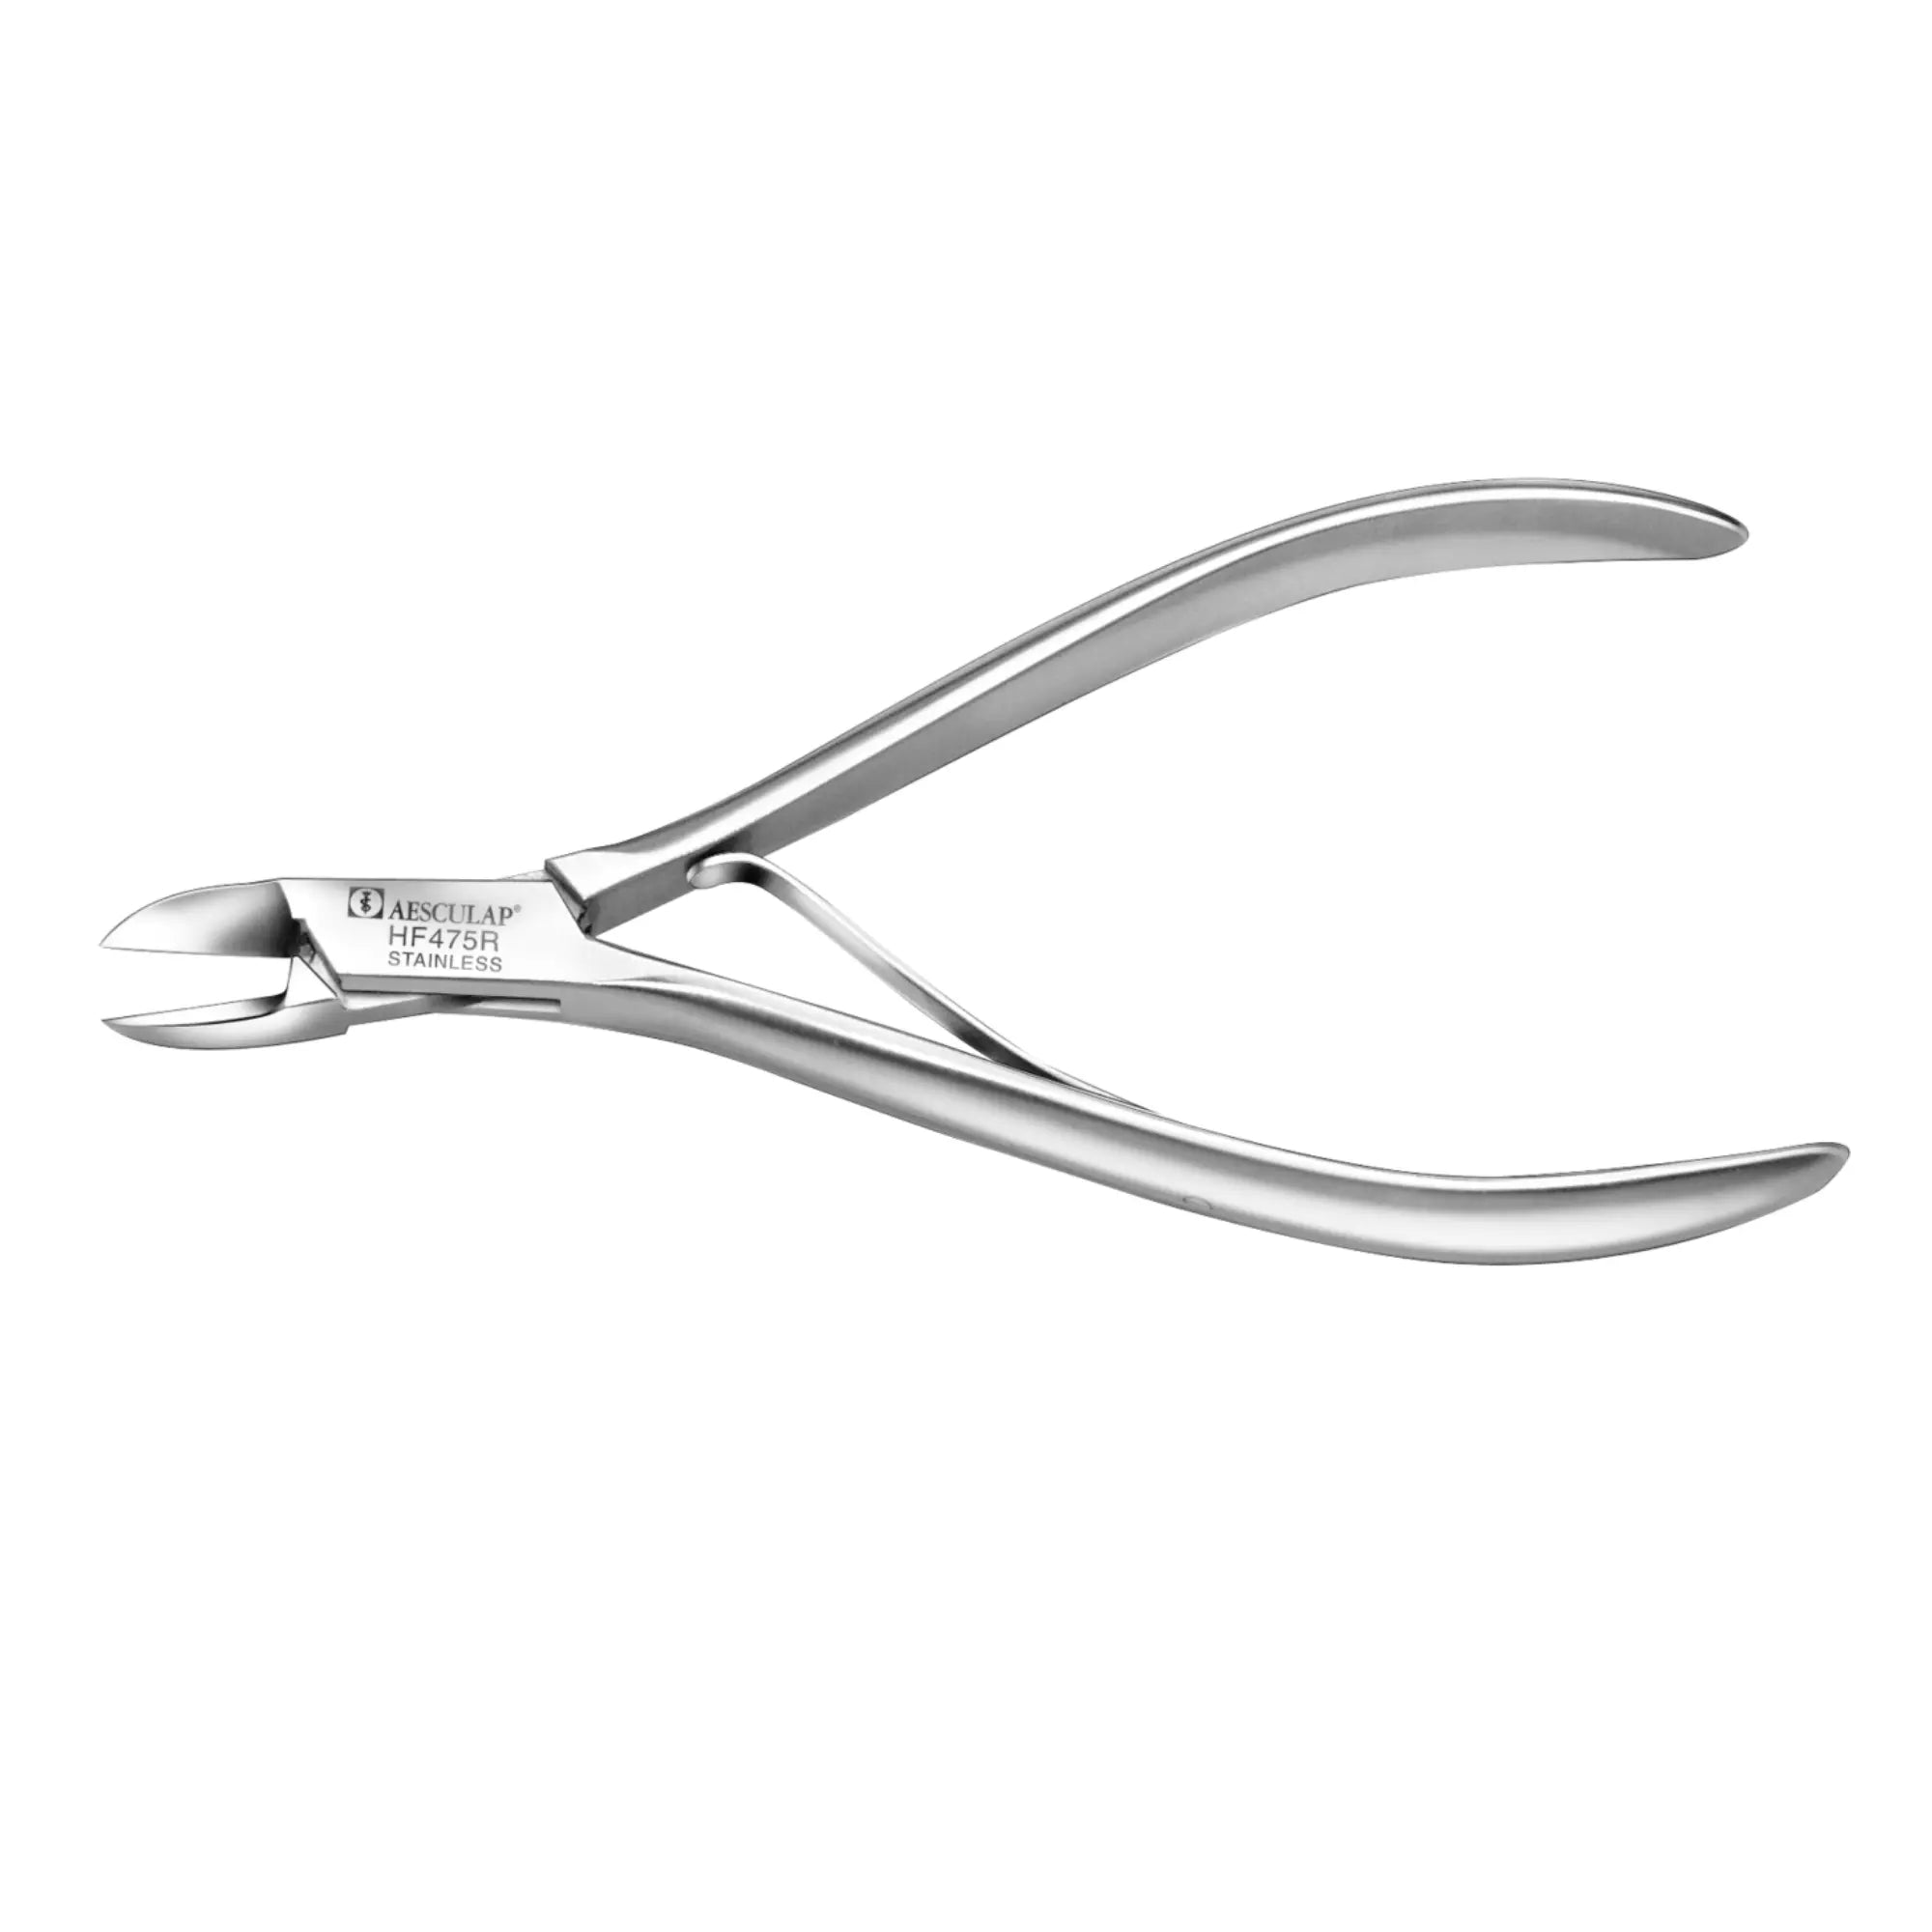 Pince à ongles - Coupe droite - Mors plats - 11,5 cm - Aesculap - HF475R Aesculap